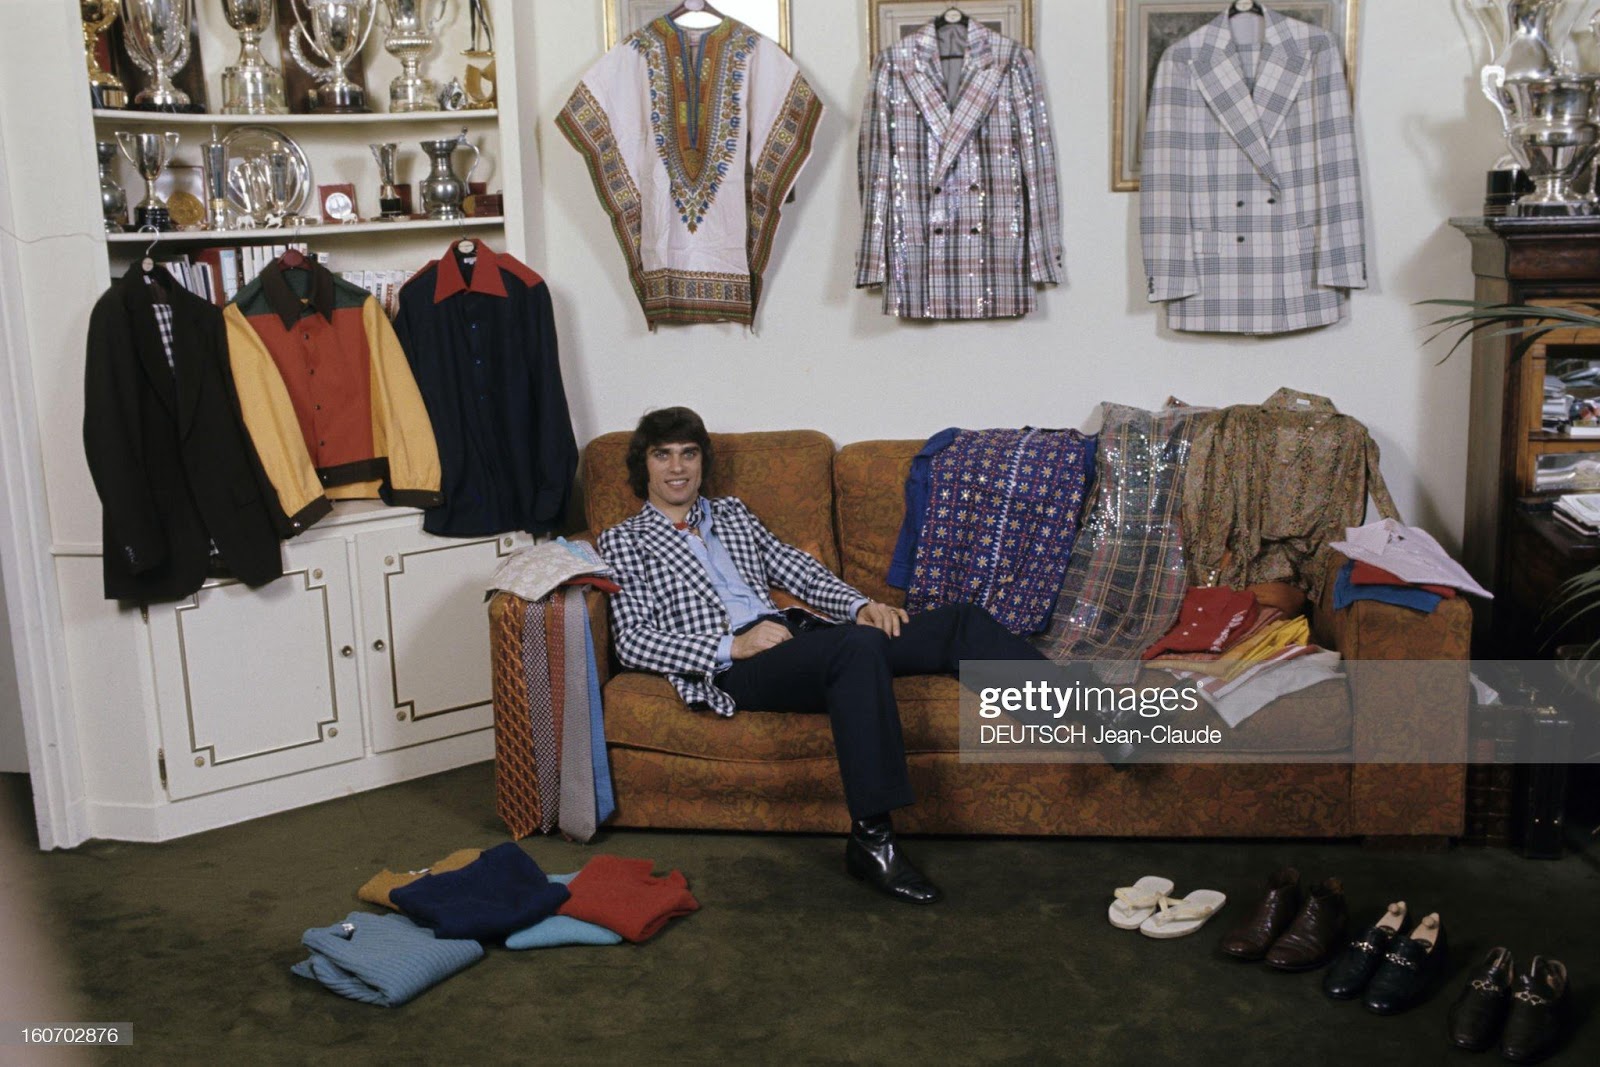 Men's Fashion, France, Paris, January 04, 1973. François Cevert poses half-lying down on a sofa, dressed in a black and white checkered jacket over a sky blue shirt with a scarf tied around his neck, over black trousers and leather boots, in a room with as many clothes and suits on hangers as there are trophies.